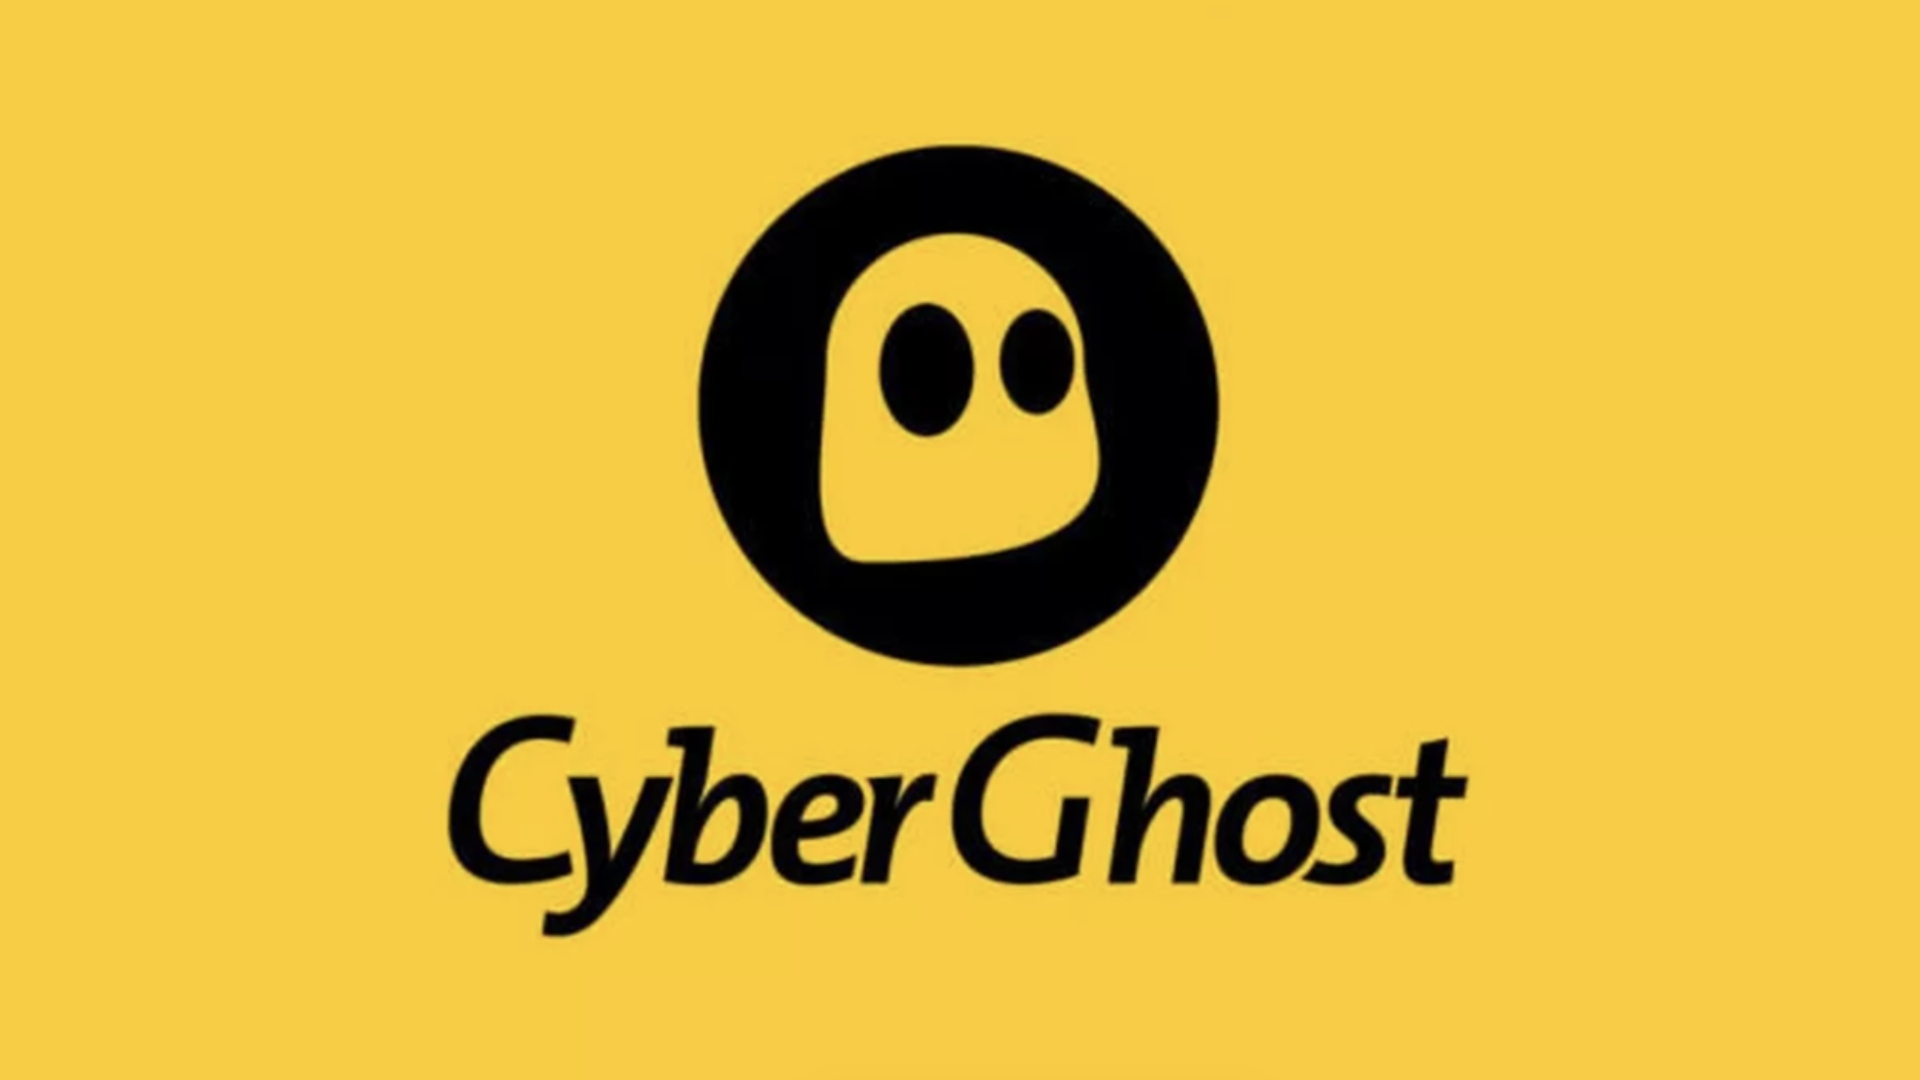 VPN browser extensions: image shows the logo of CyberGhost, the best Microsoft Edge VPN.